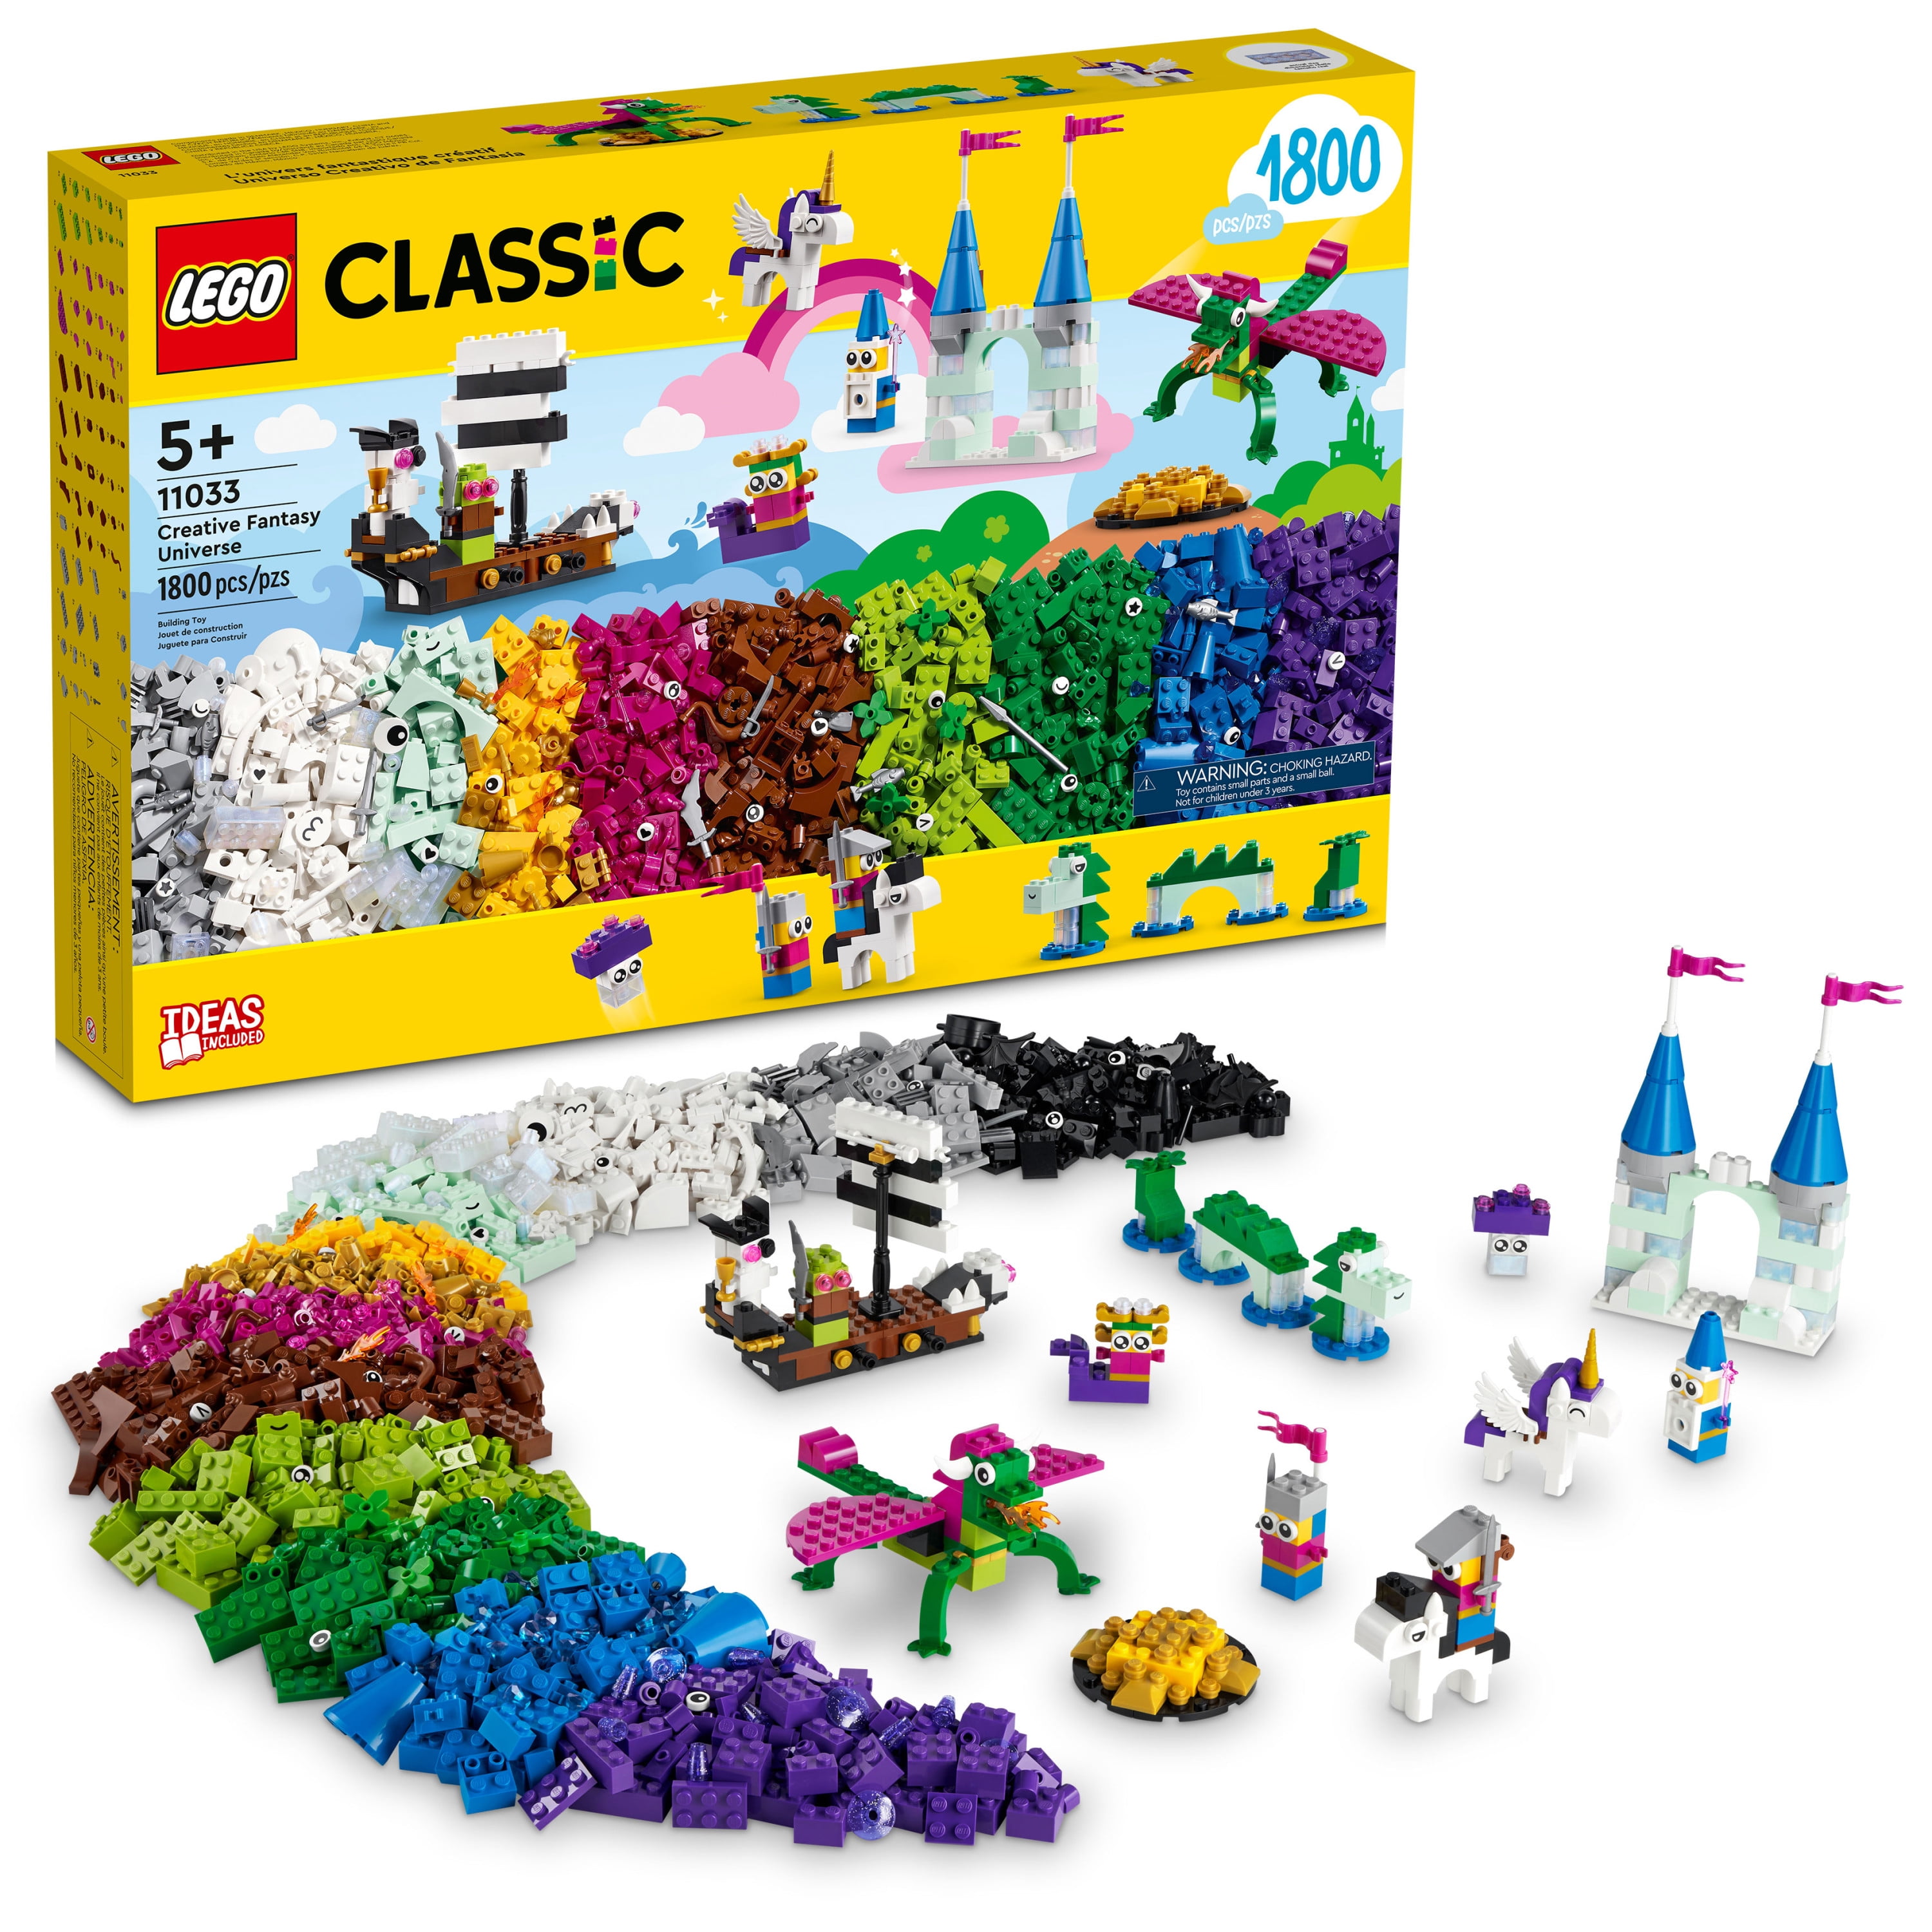 LEGO Creative Fantasy Universe Set 11033, Adventure with Unicorn Toy, Castle, Dragon and Pirate Ship Builds, Toys for Kids ages 5 Plus - Walmart.com